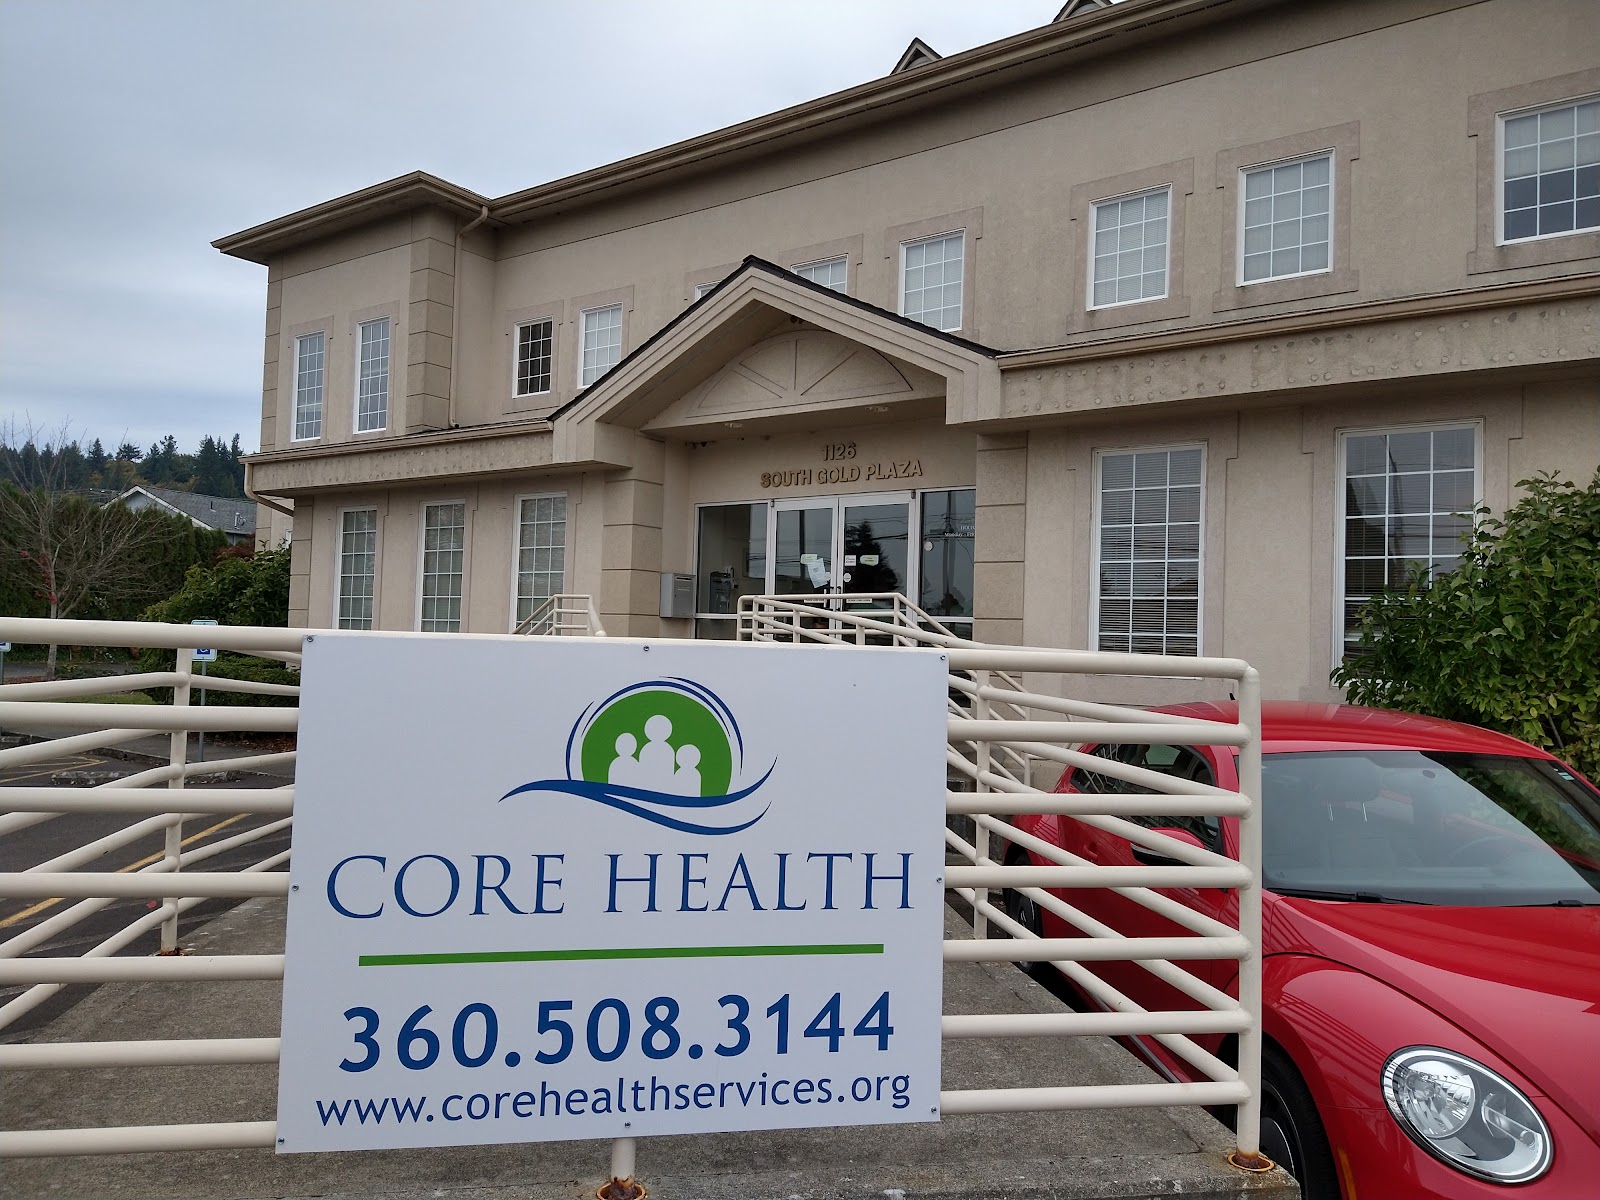 CORE Health 1616 South Gold Street